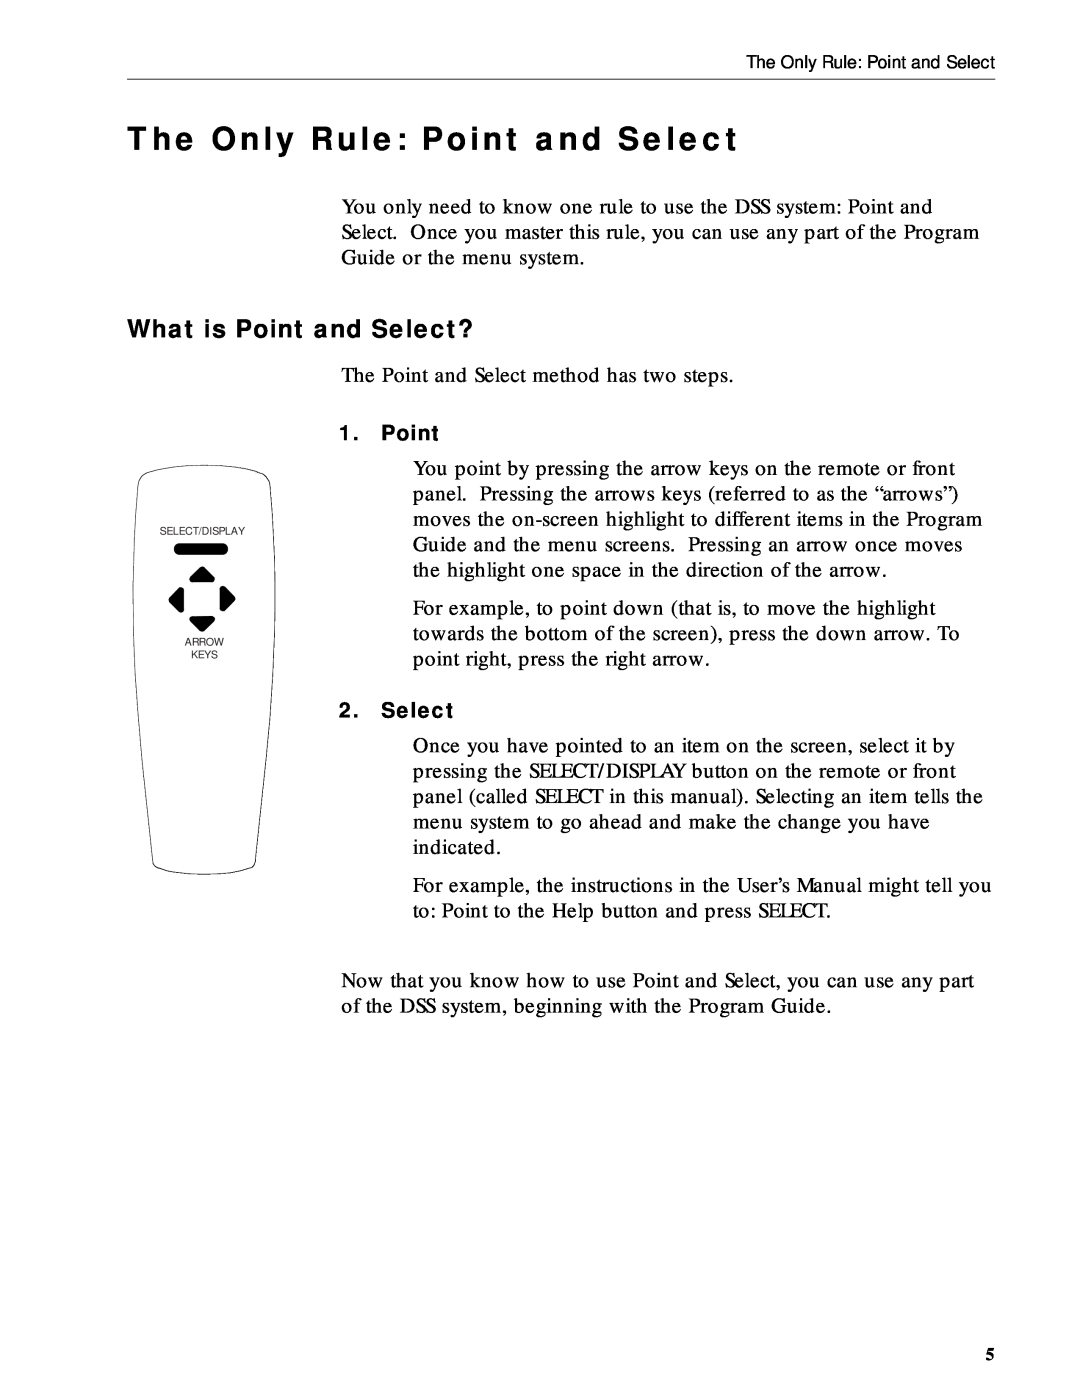 RCA DRD212NW user manual The Only Rule Point and Select, What is Point and Select? 